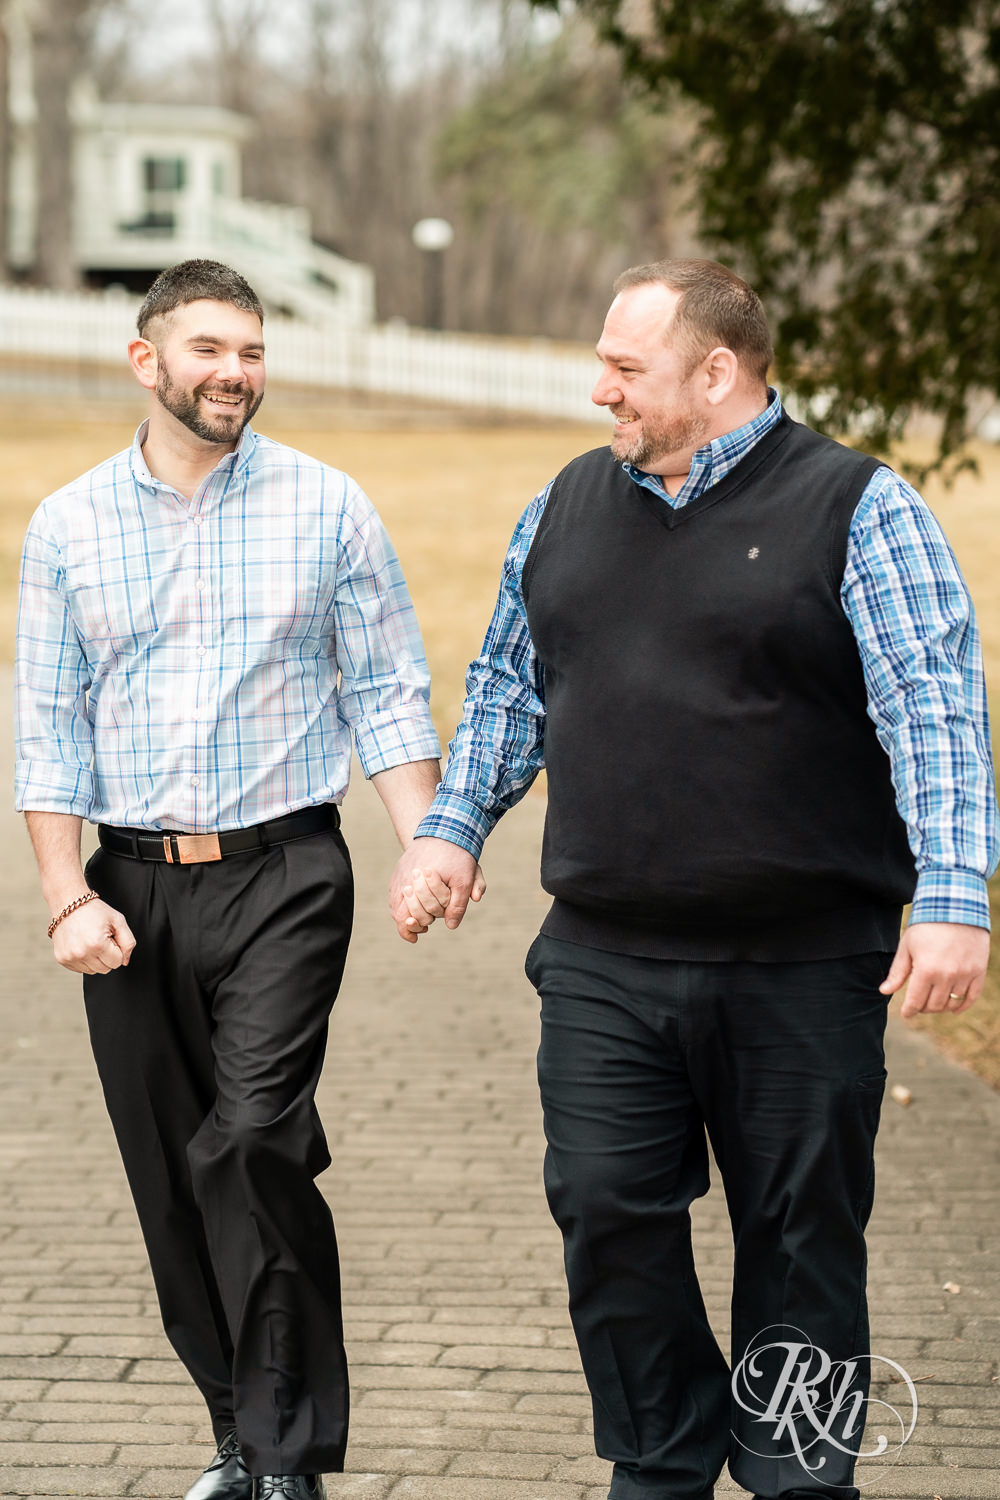 Two men in plaid shirts laugh while walking during engagement photography at Pioneer Park in Stillwater, Minnesota.